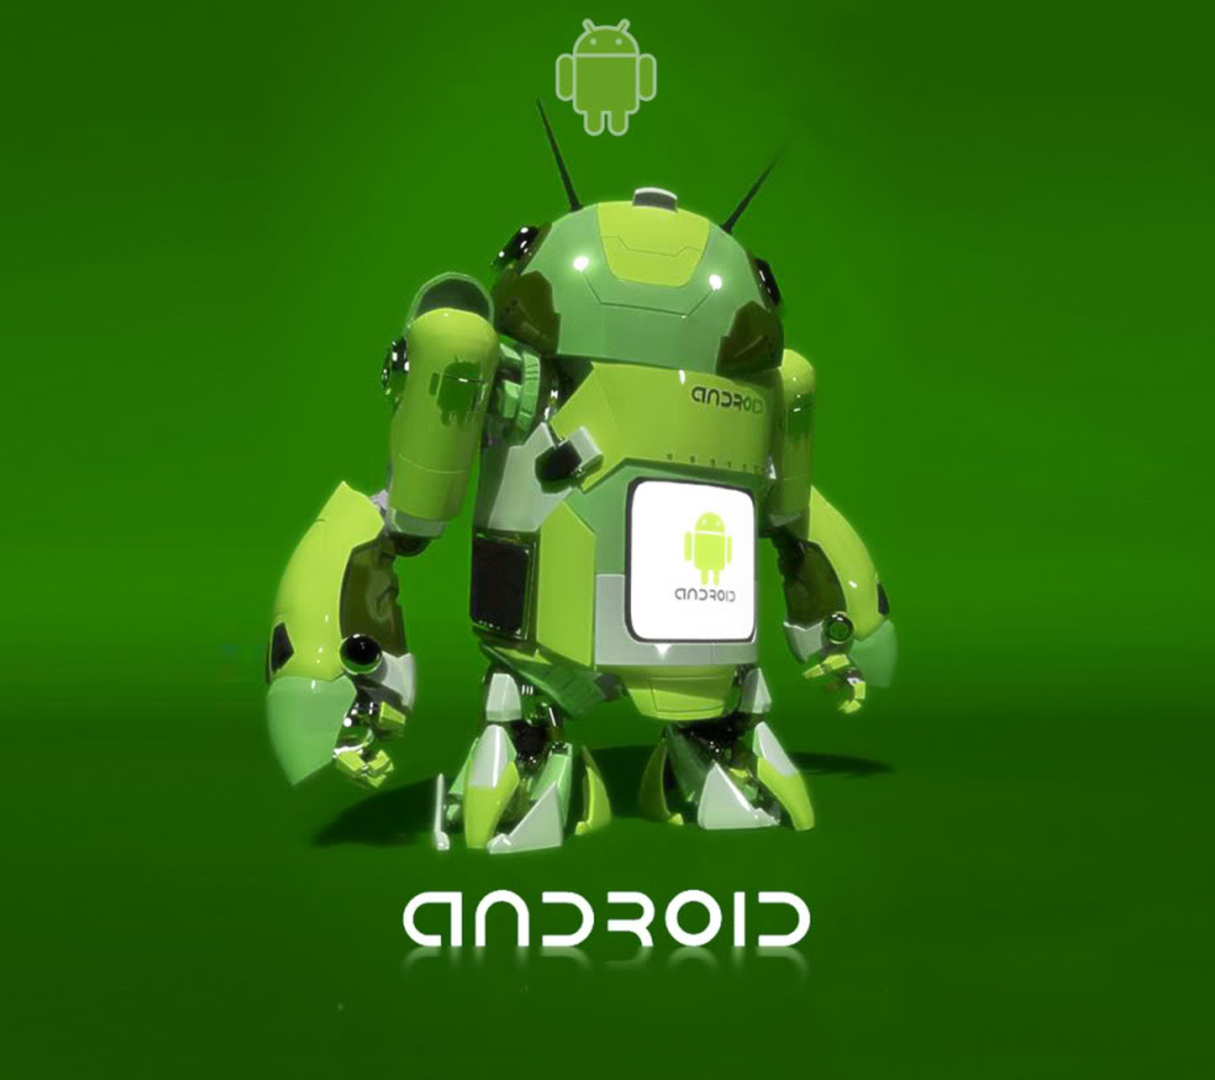 Cool Android Robot Hd Wallpaper 1215x1080 Download Wallpapers Page